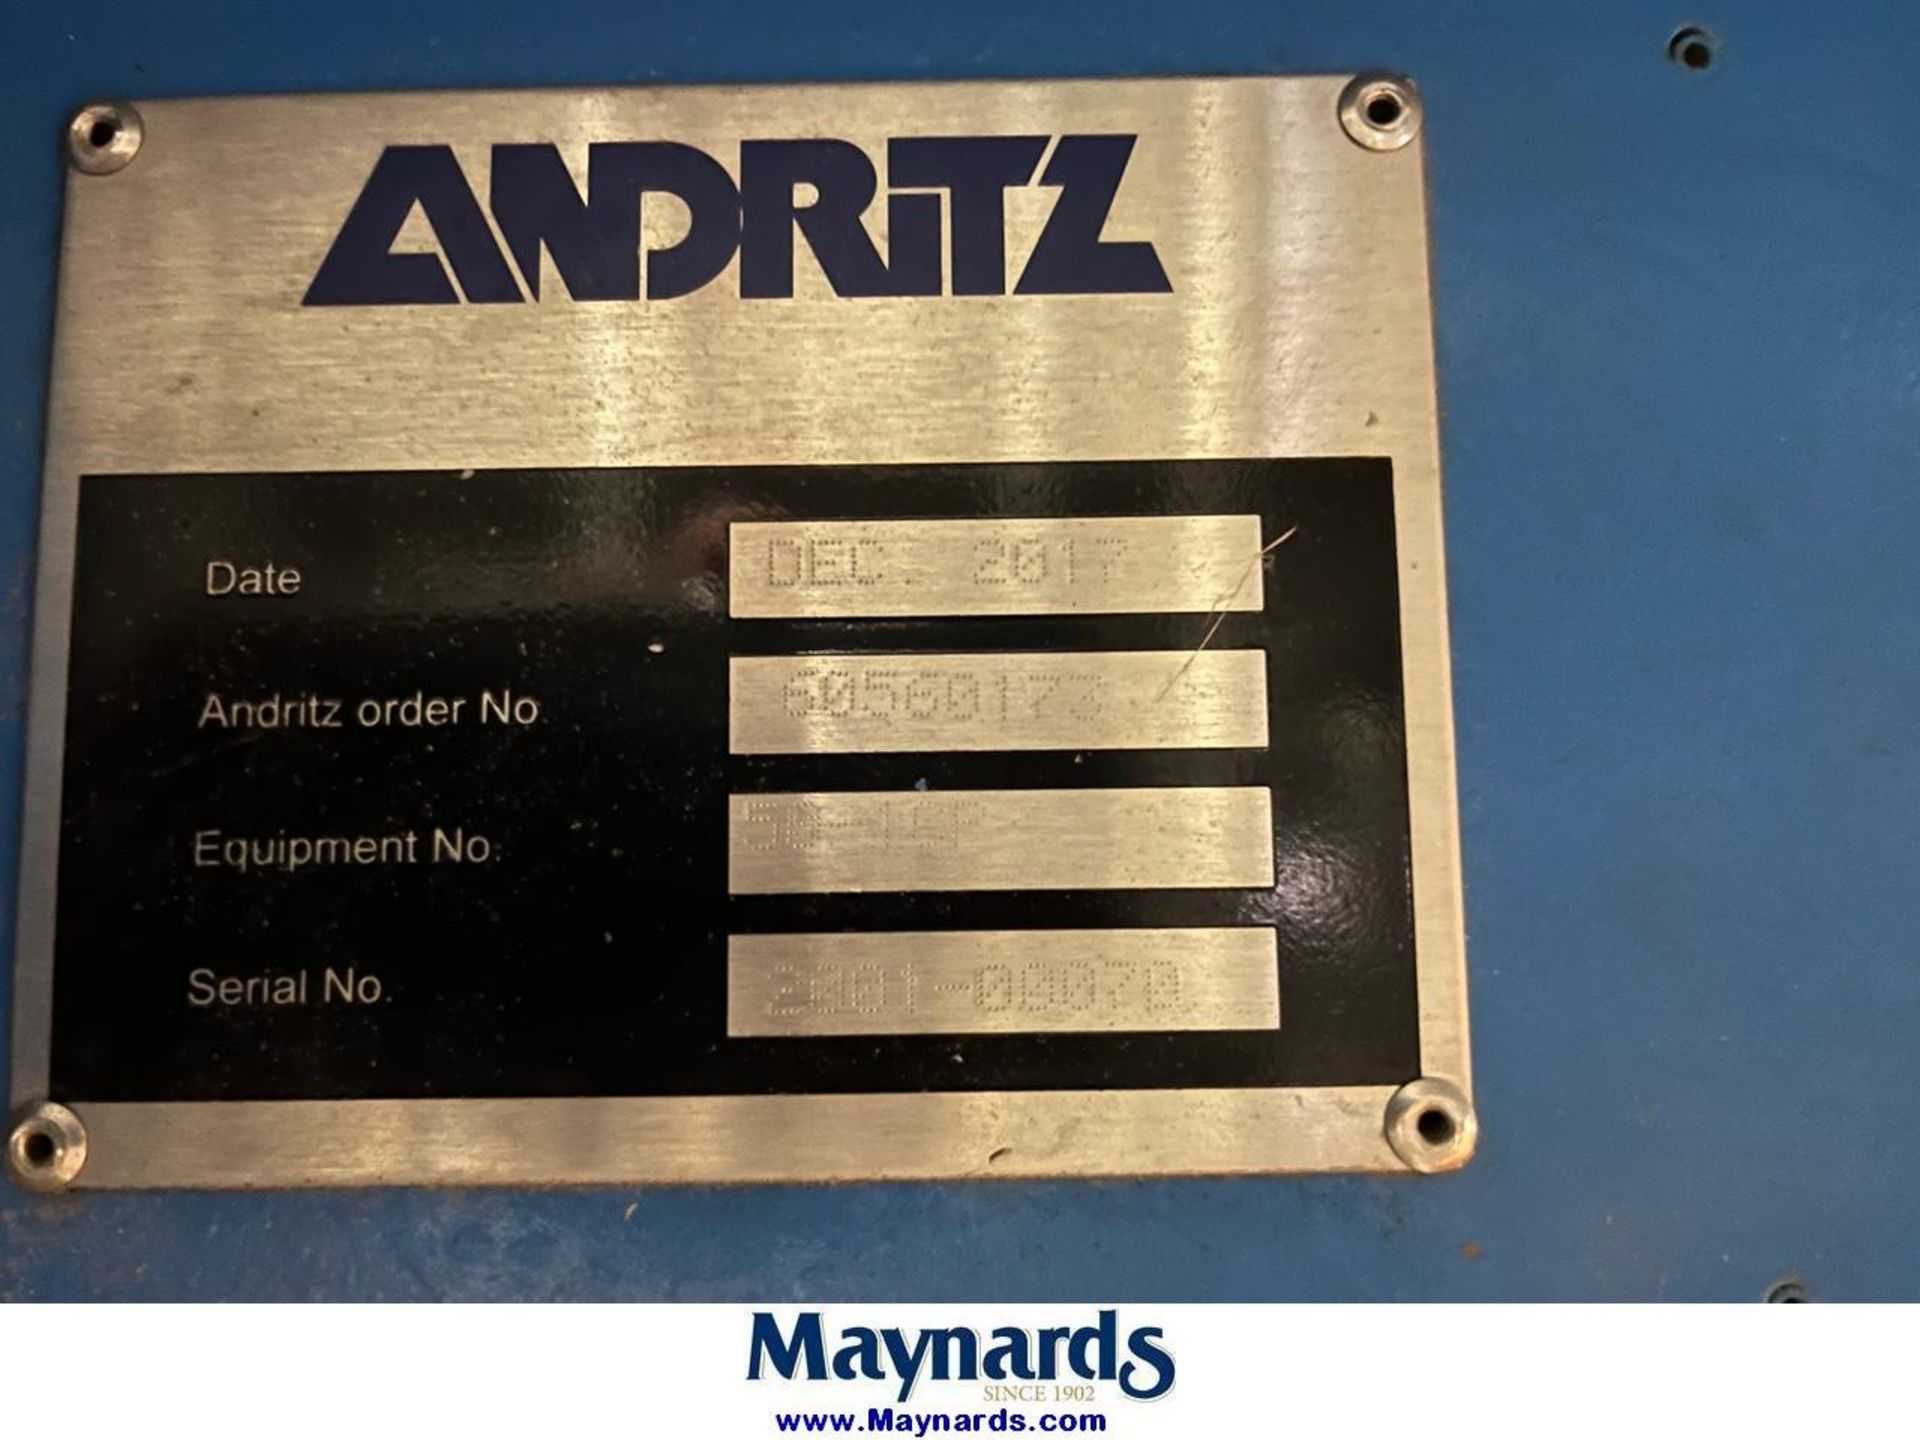 ANDRITZ REFINER MODEL 50-1CP PRESSURIZED MANUFACTURED 2018 - Image 4 of 5